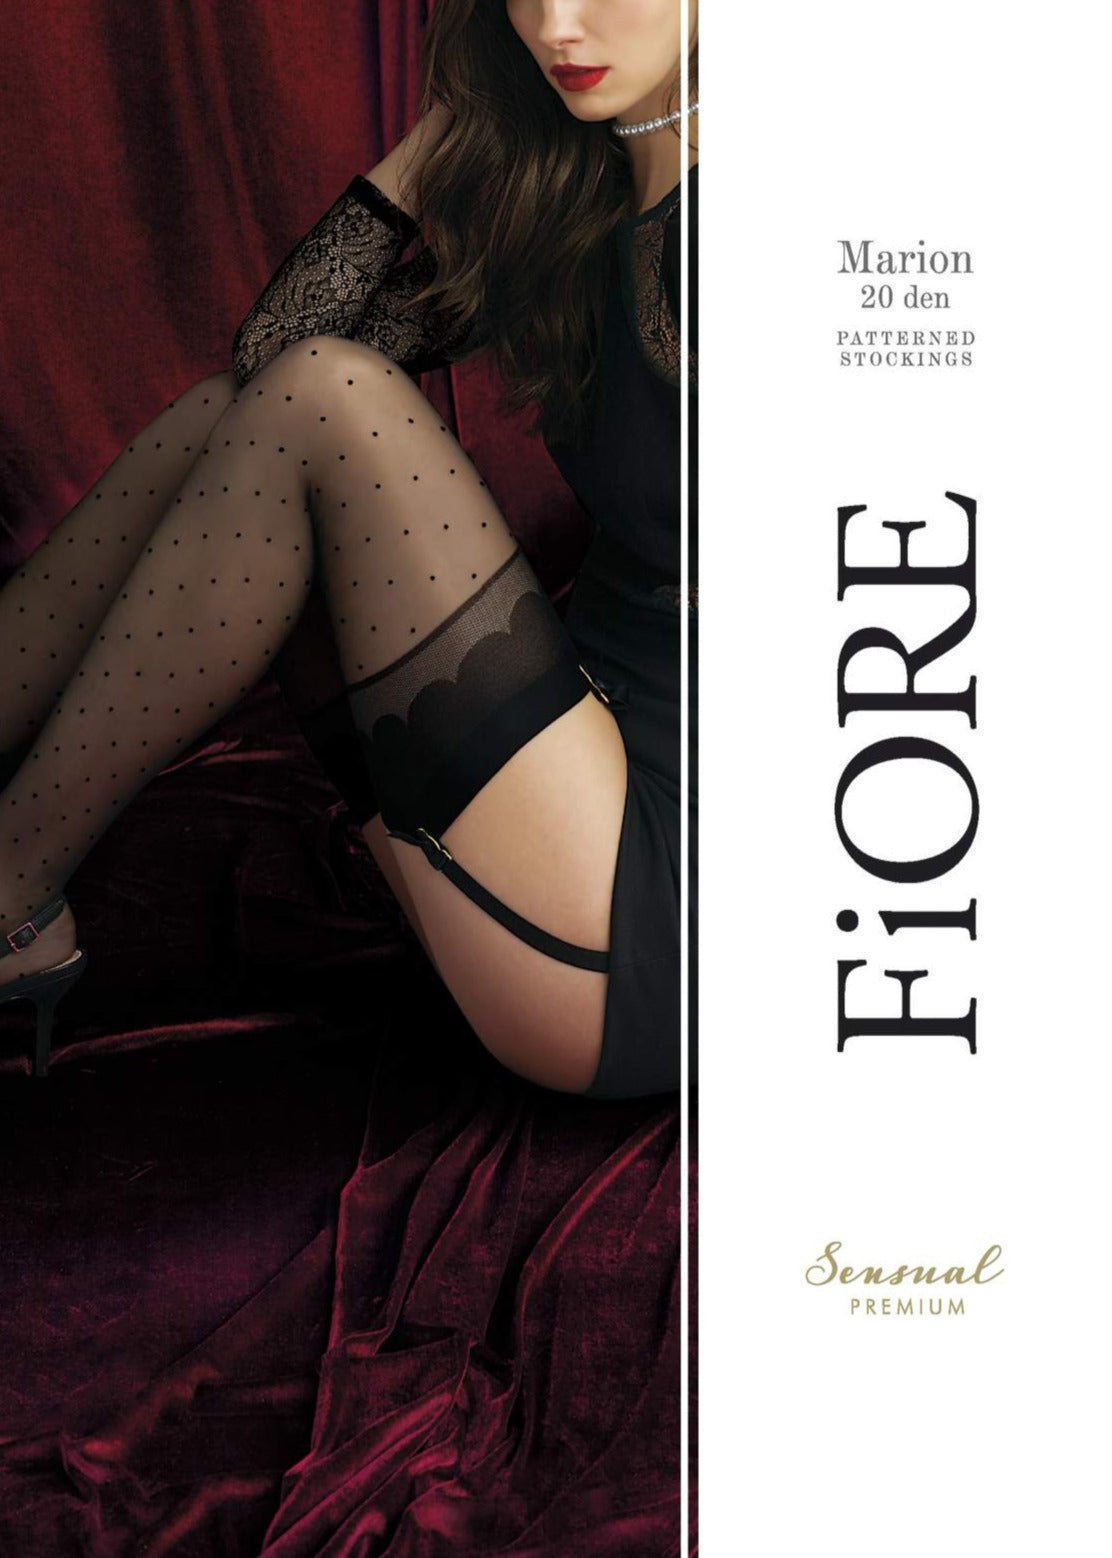 Fiore O 4057 Marion Stockings - Sheer black fashion stockings with a small woven spot pattern, plain deep top with a scalloped design detail. To be worn with a suspender/garter belt.